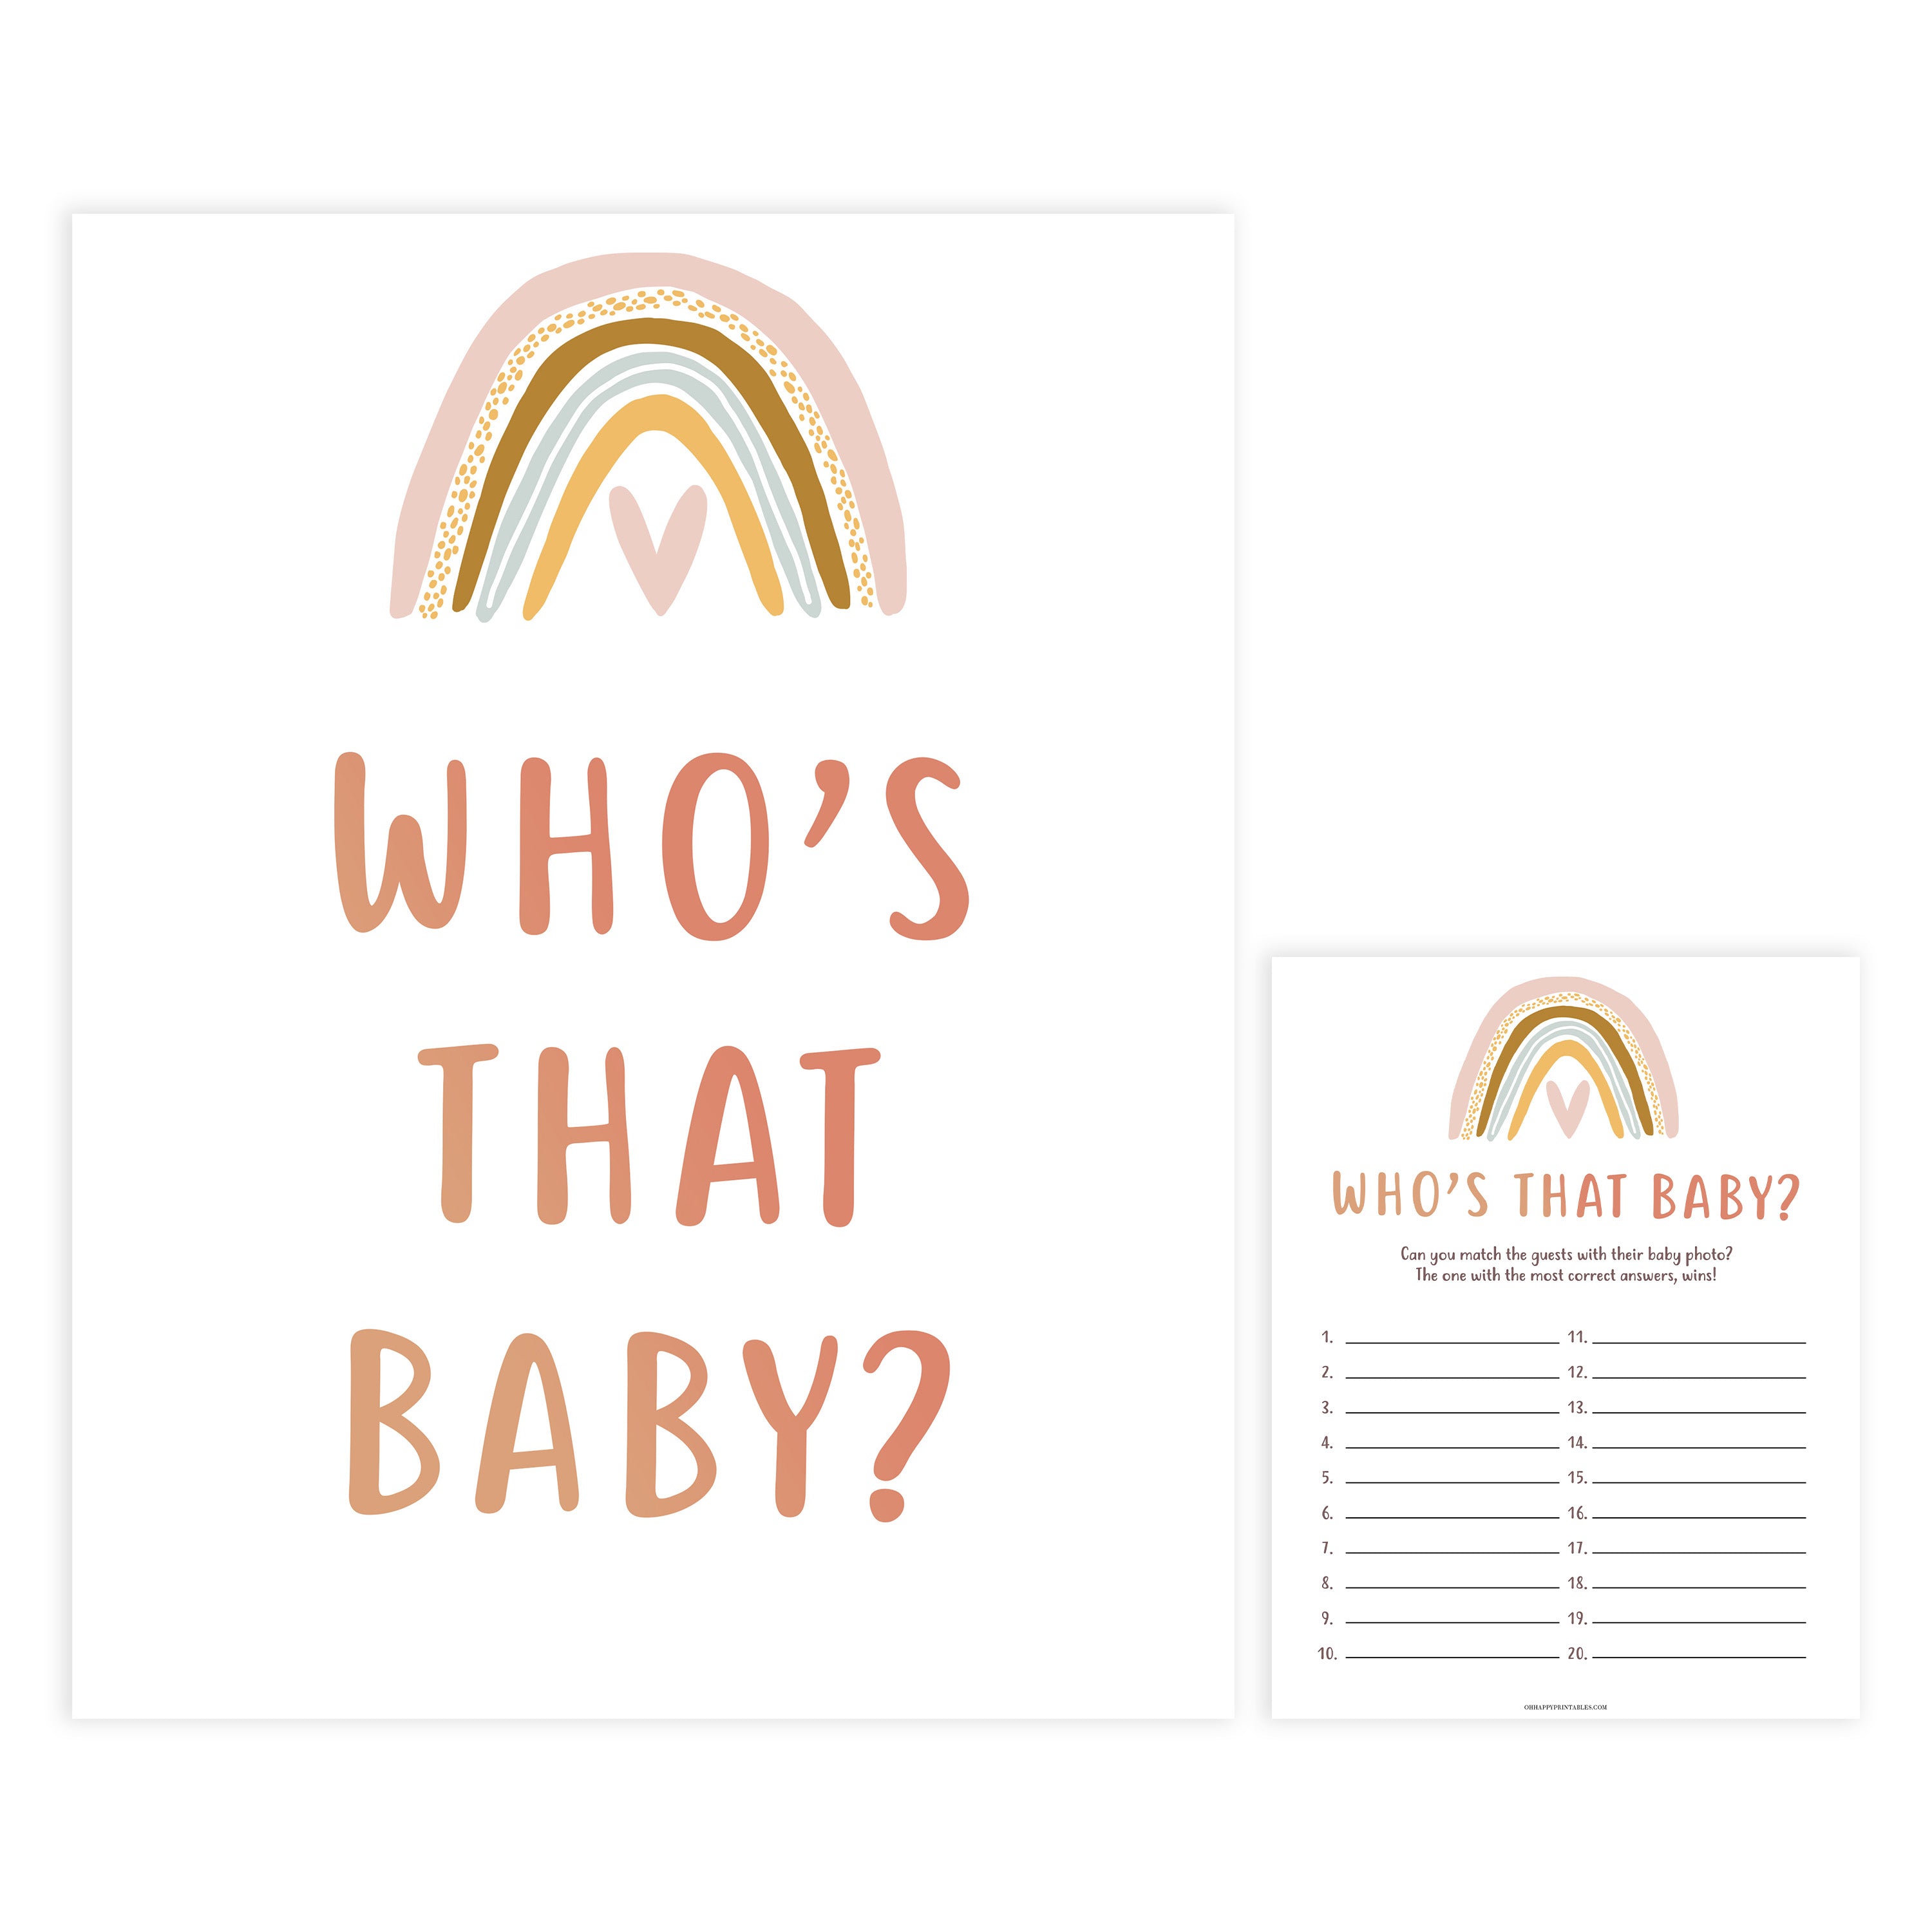 whos that baby game, Printable baby shower games, boho rainbow baby games, baby shower games, fun baby shower ideas, top baby shower ideas, boho rainbow baby shower, baby shower games, fun boho rainbow baby shower ideas